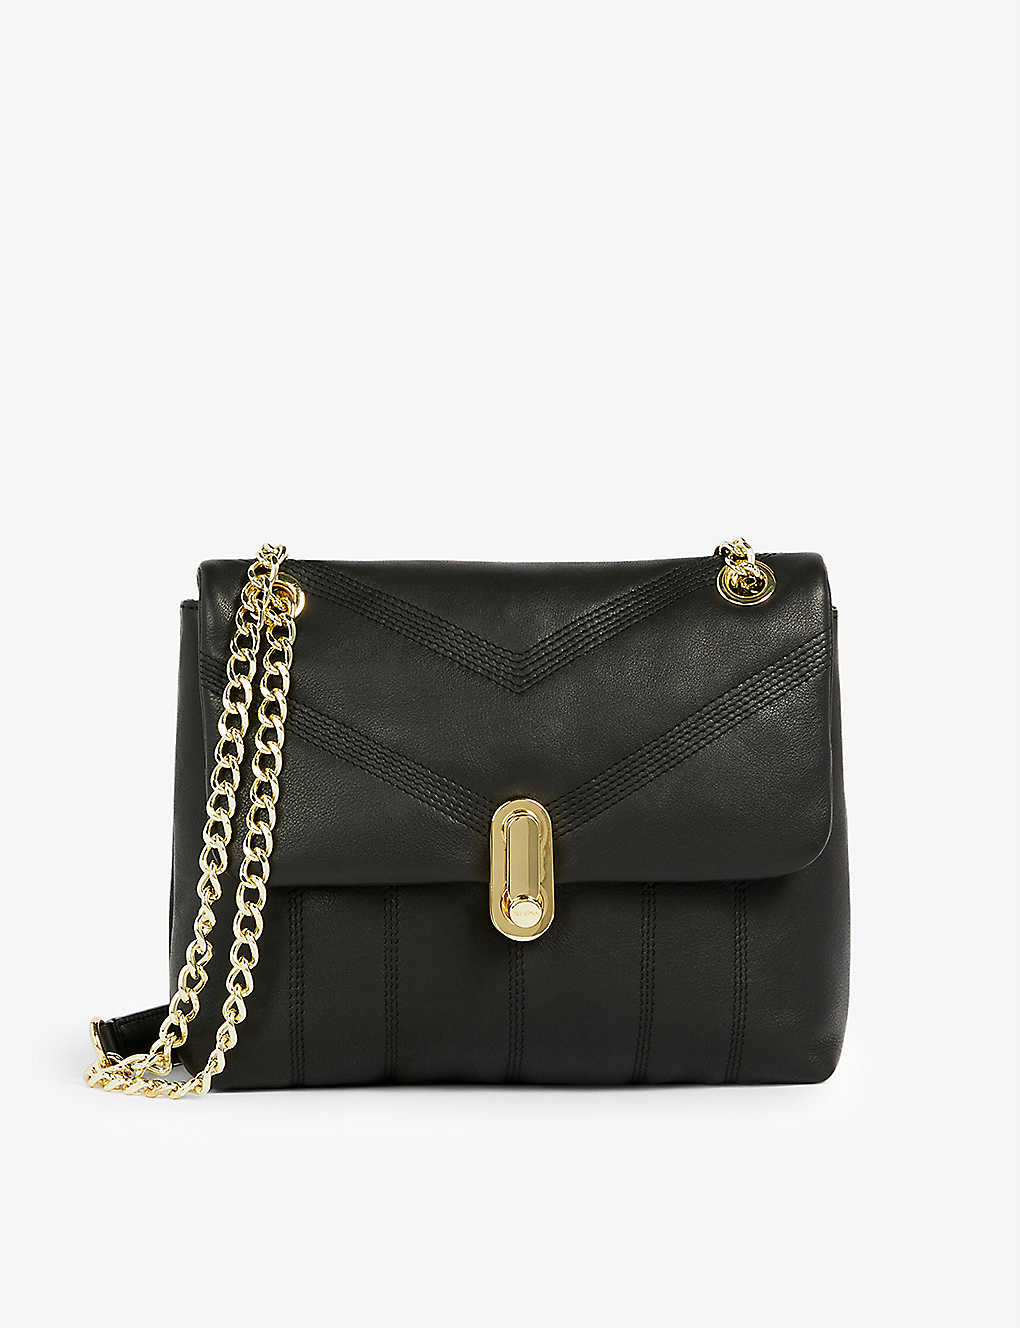 TED BAKER Ayalina quilted leather cross-body bag